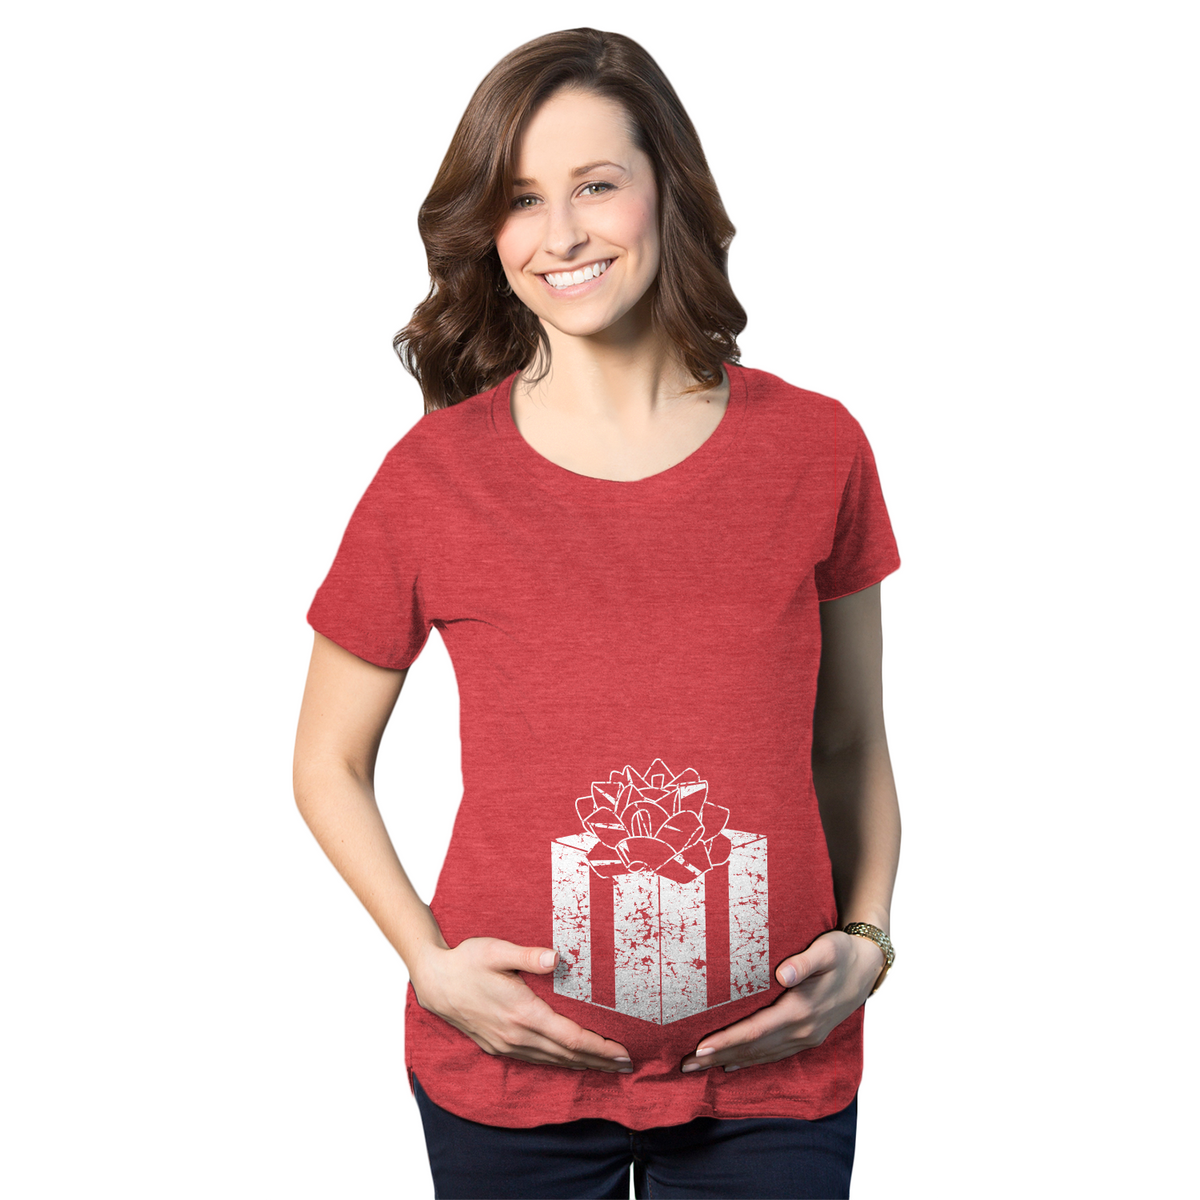 Funny Red Belly Present Maternity T Shirt Nerdy Christmas Tee